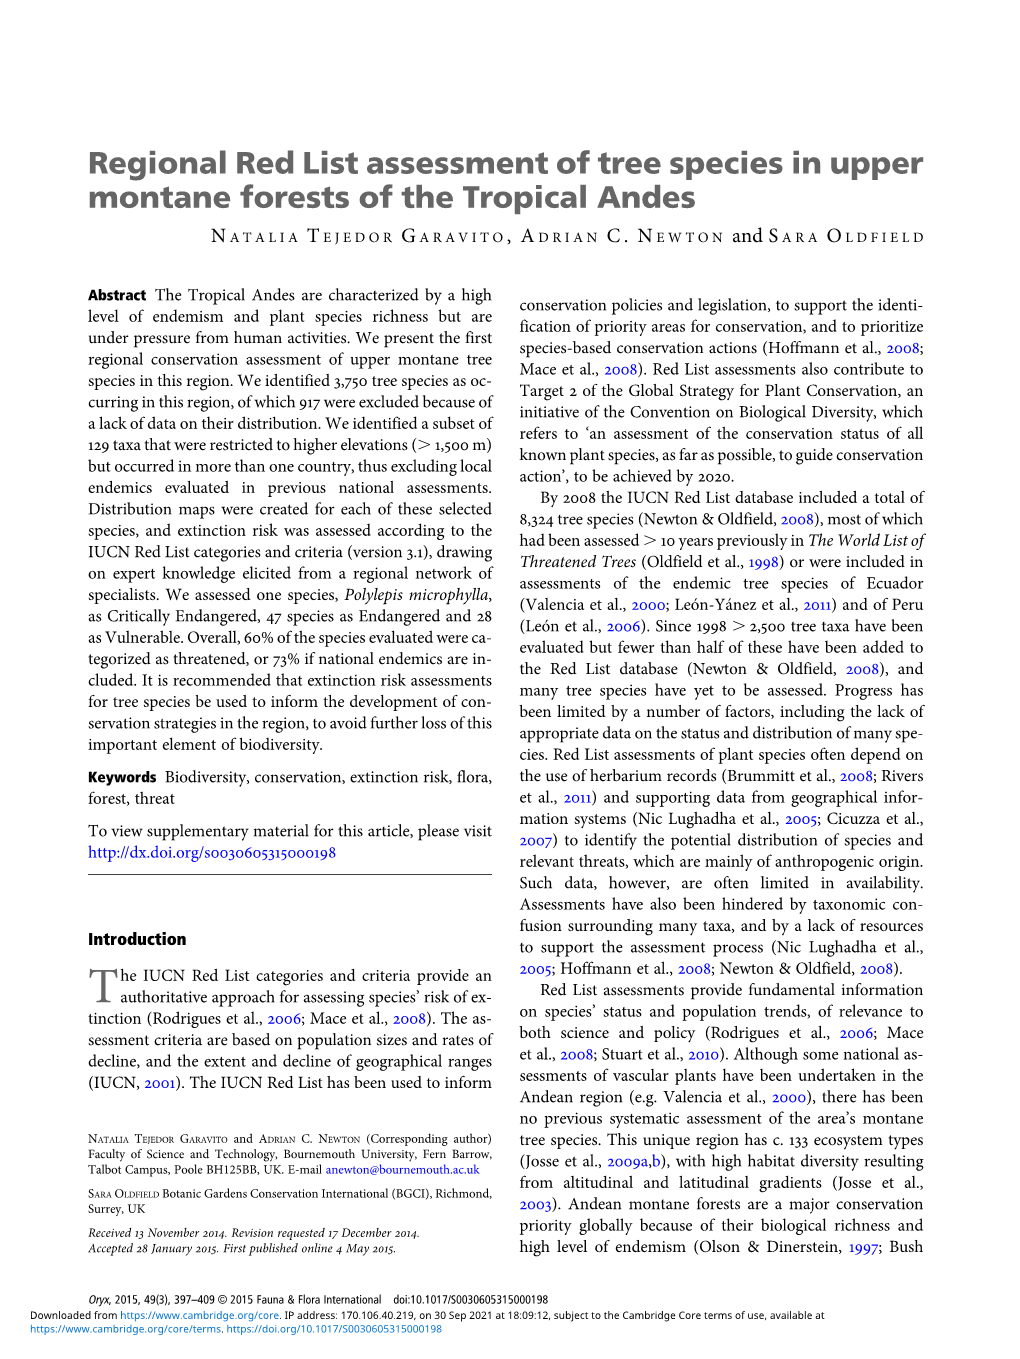 Regional Red List Assessment of Tree Species in Upper Montane Forests of the Tropical Andes